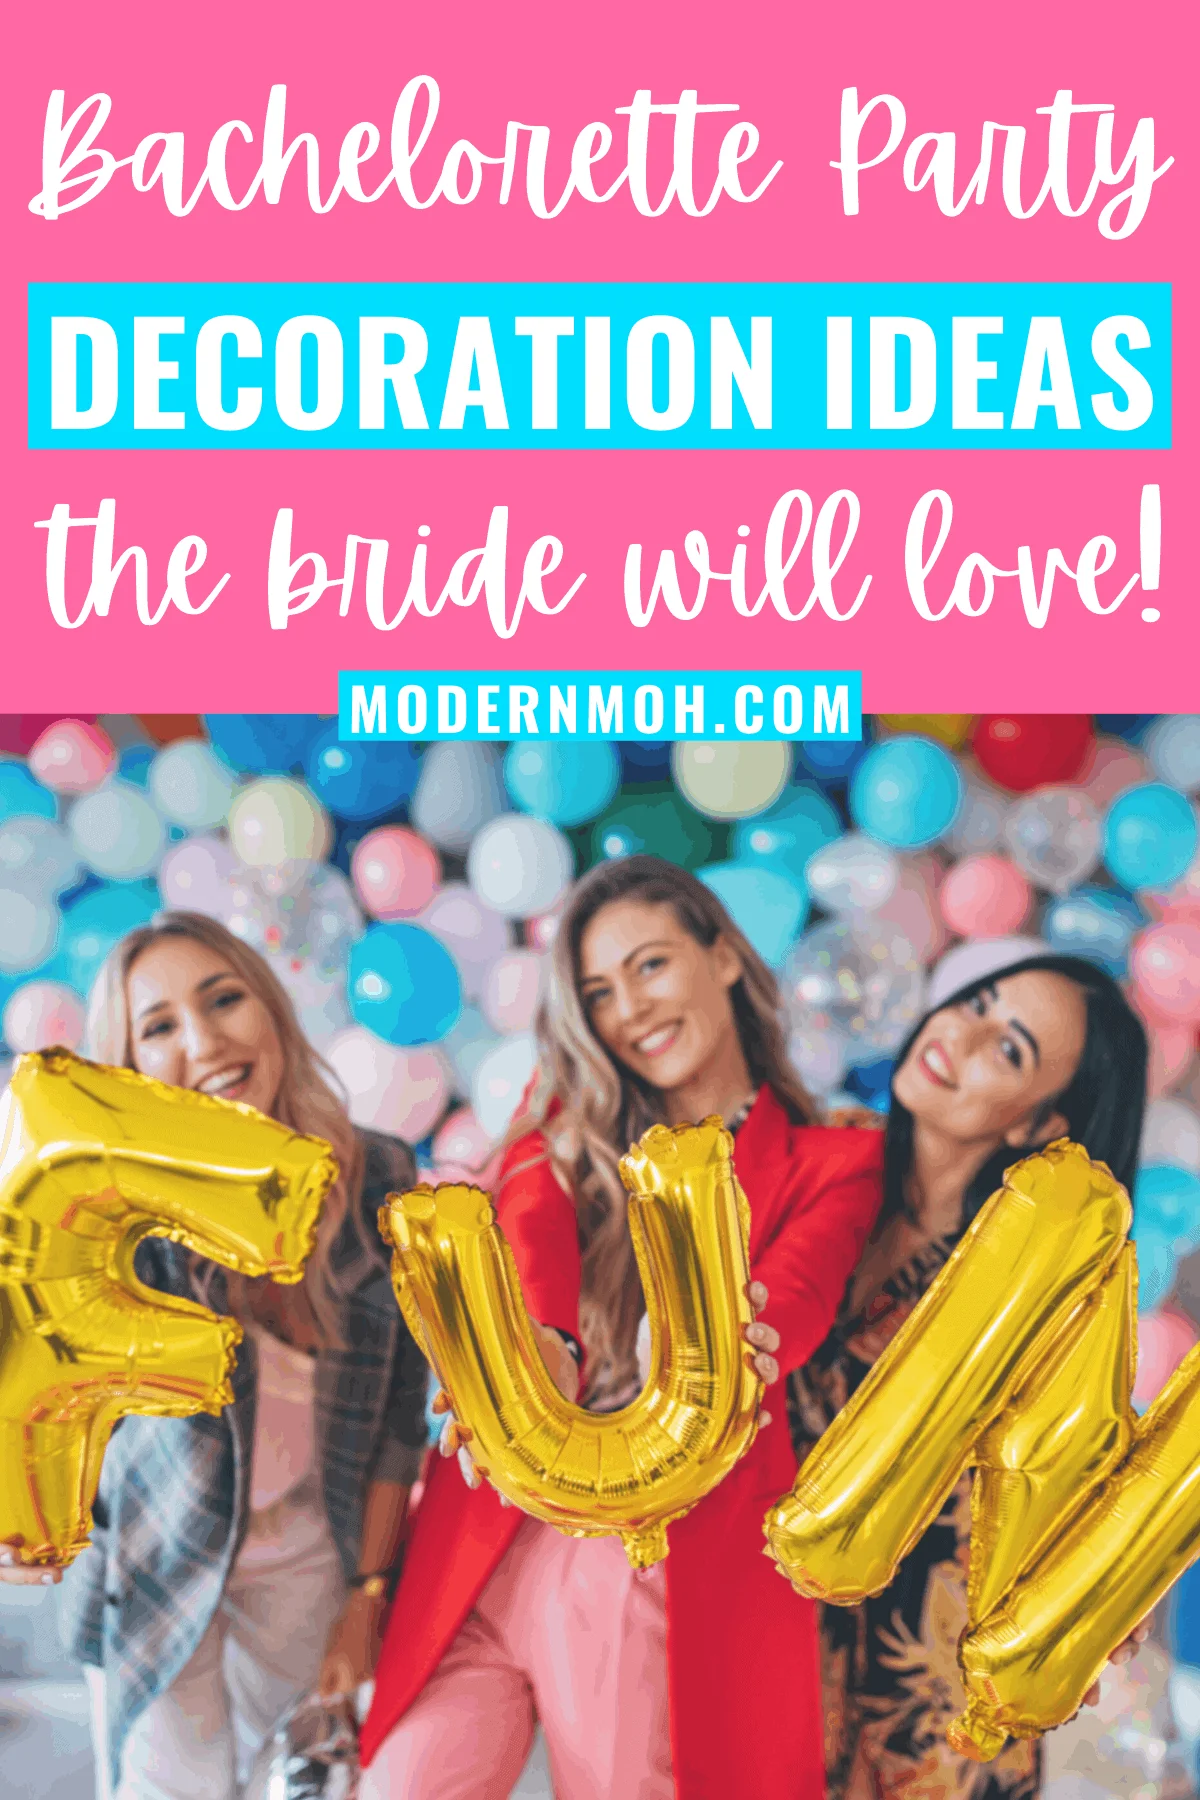 30 Bachelorette Party Decorations for a Photo-Worthy Weekend